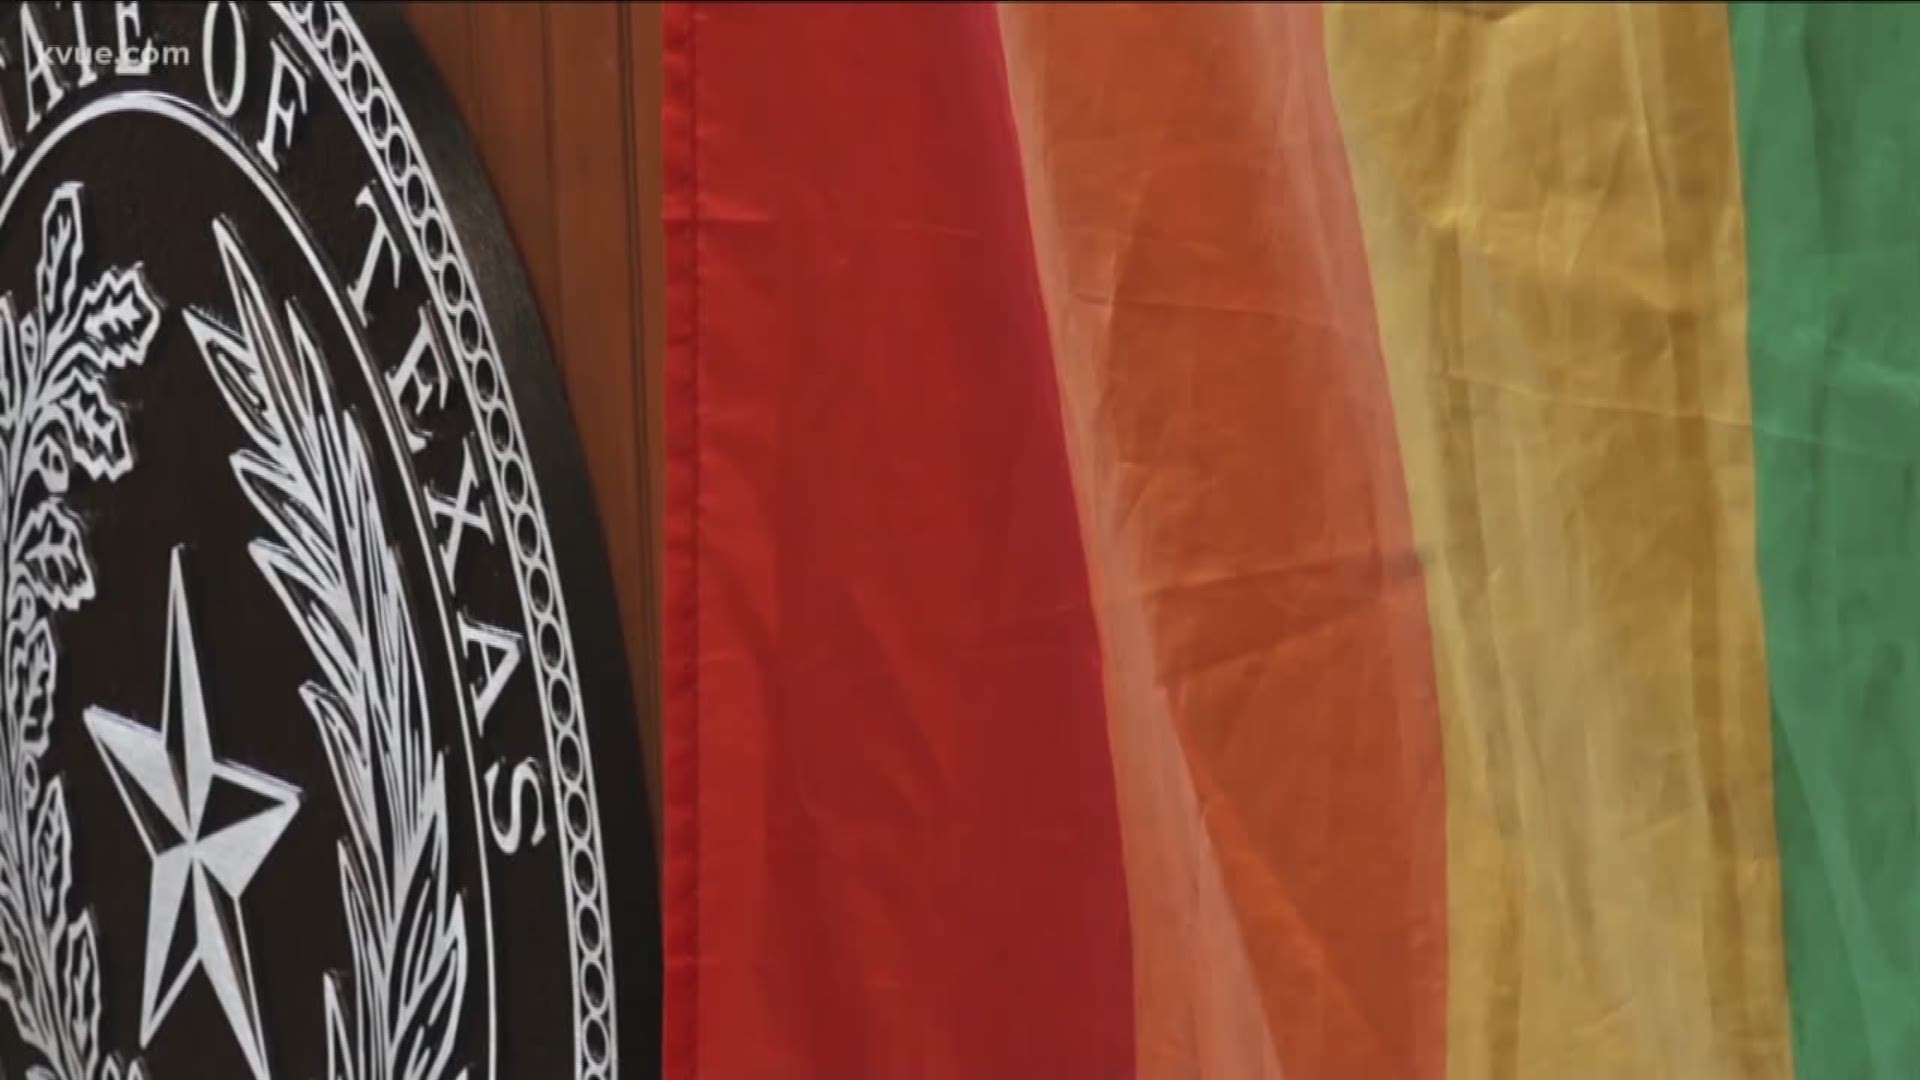 Two flags won't be waving outside county buildings in Williamson County – Pride and P.O.W.-M.I.A.